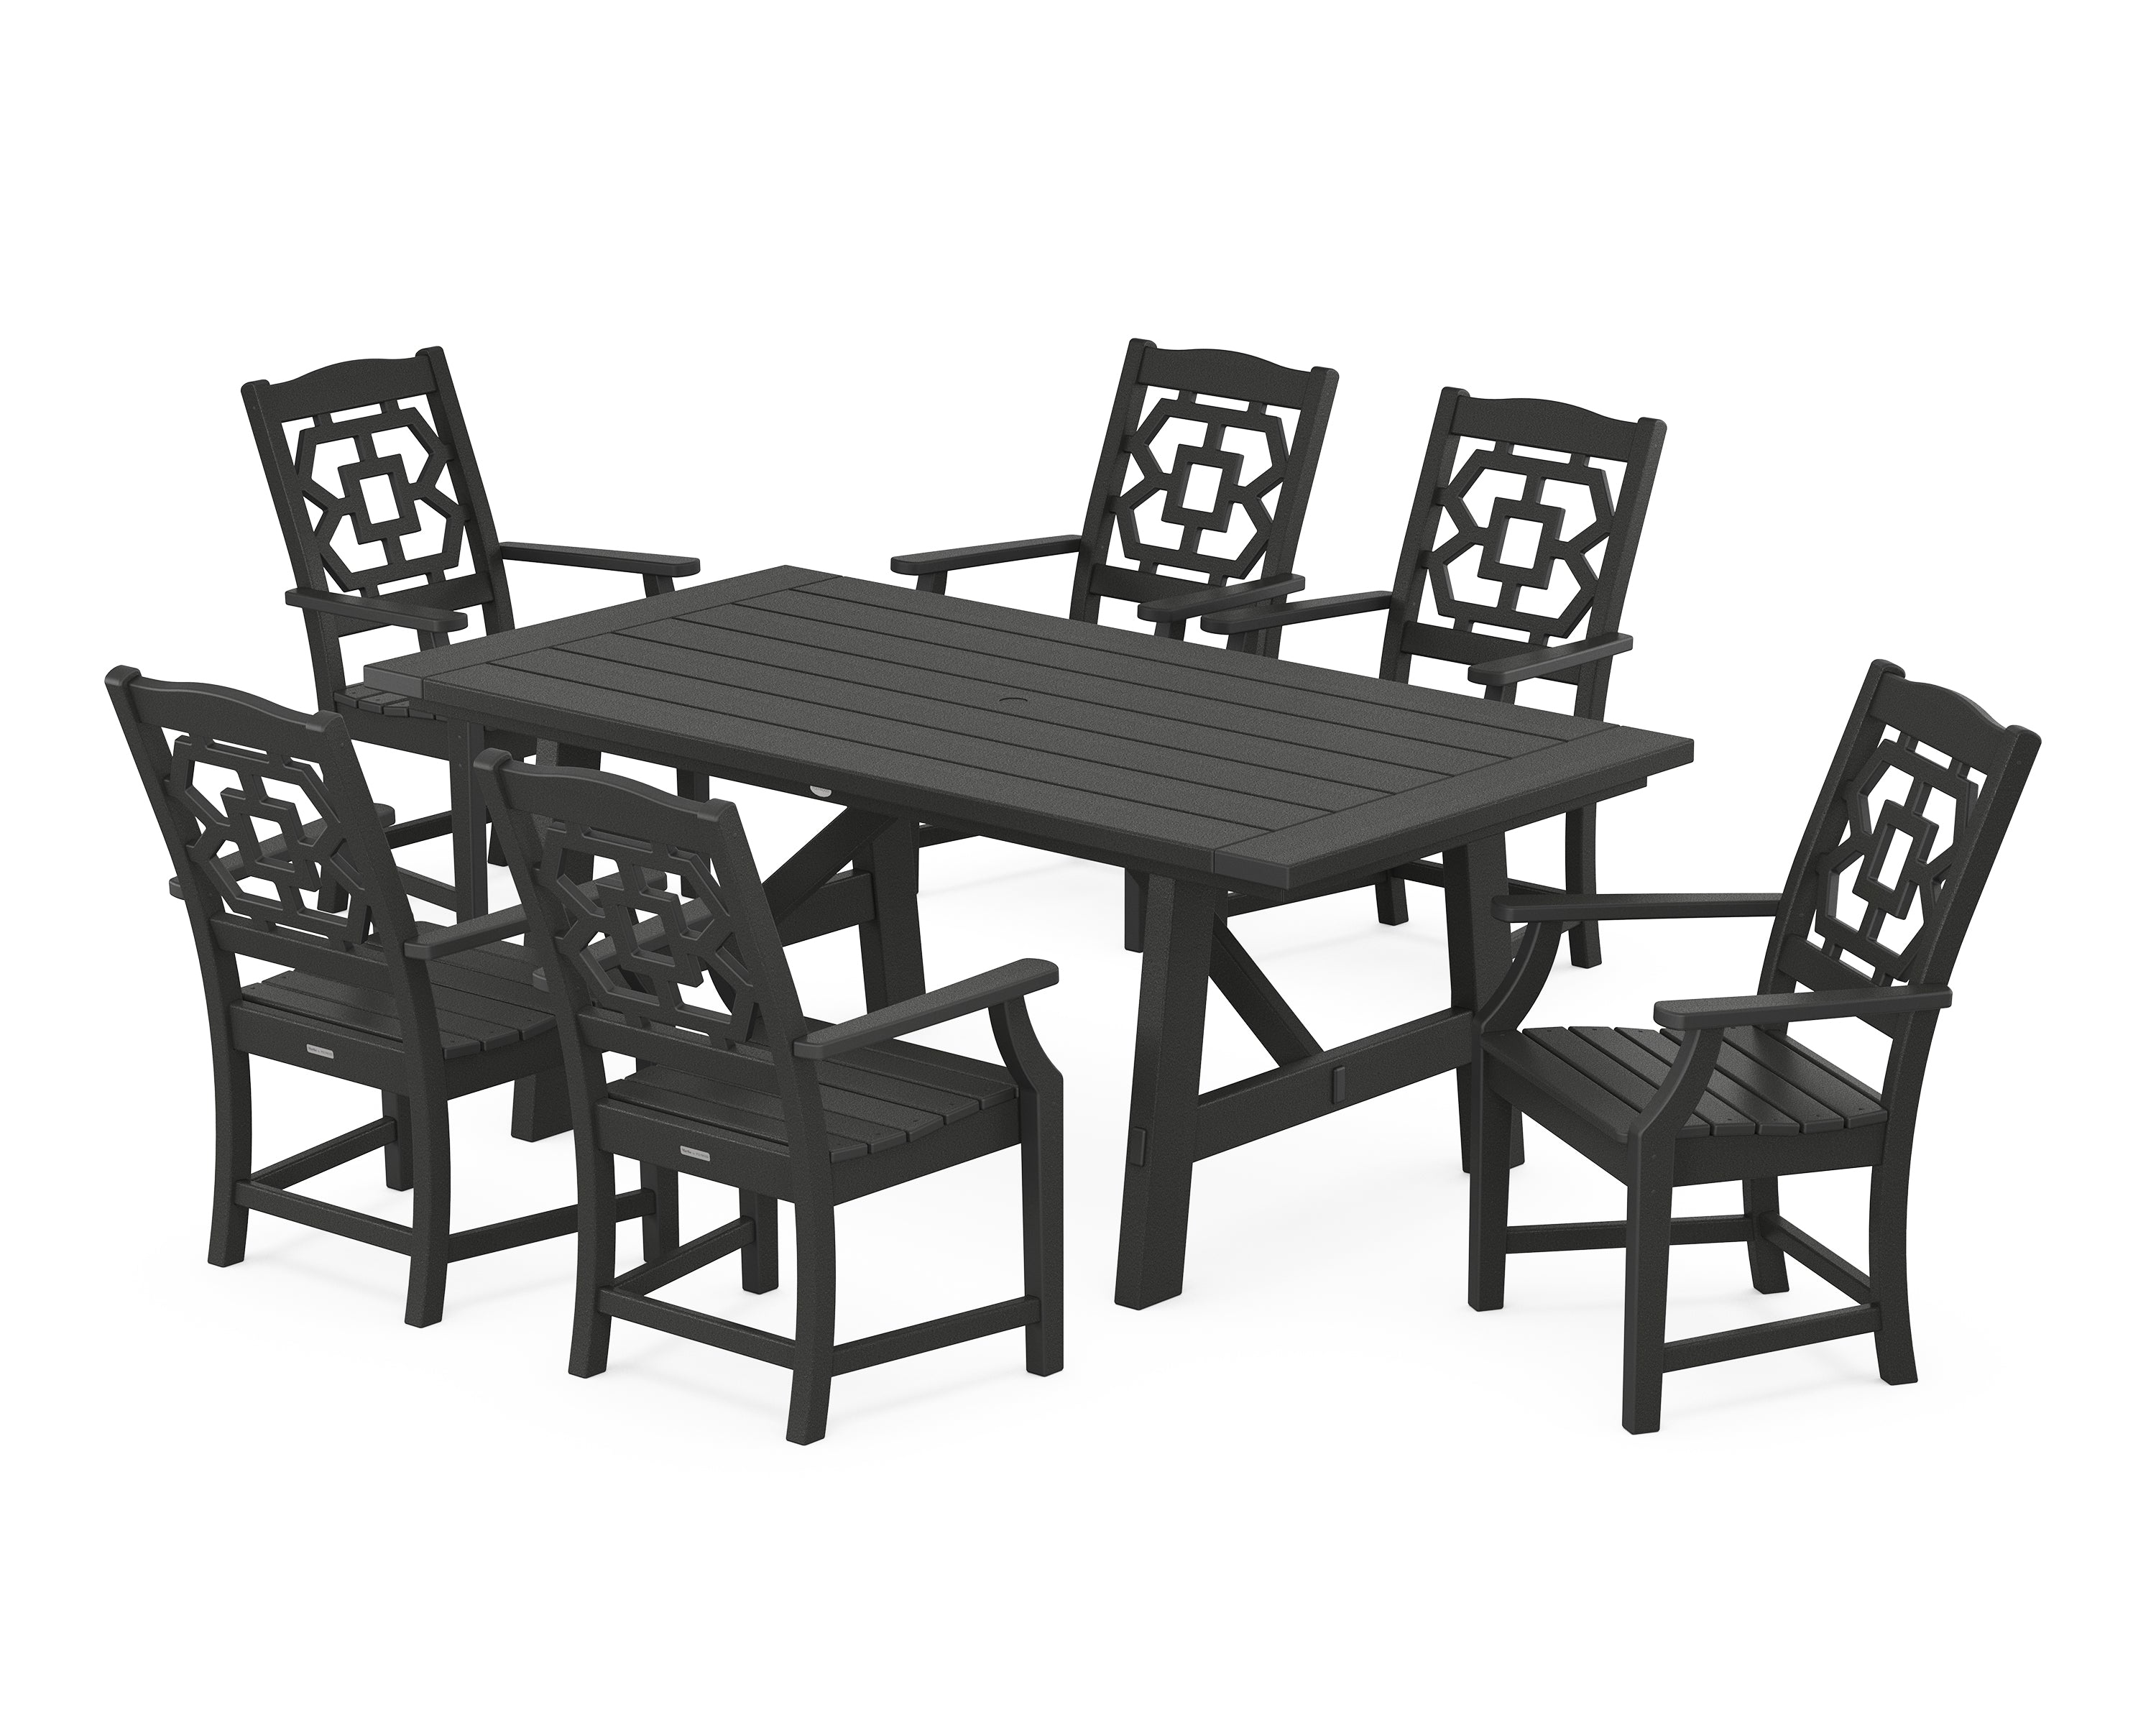 Martha Stewart by POLYWOOD® Chinoiserie Arm Chair 7-Piece Rustic Farmhouse Dining Set in Black